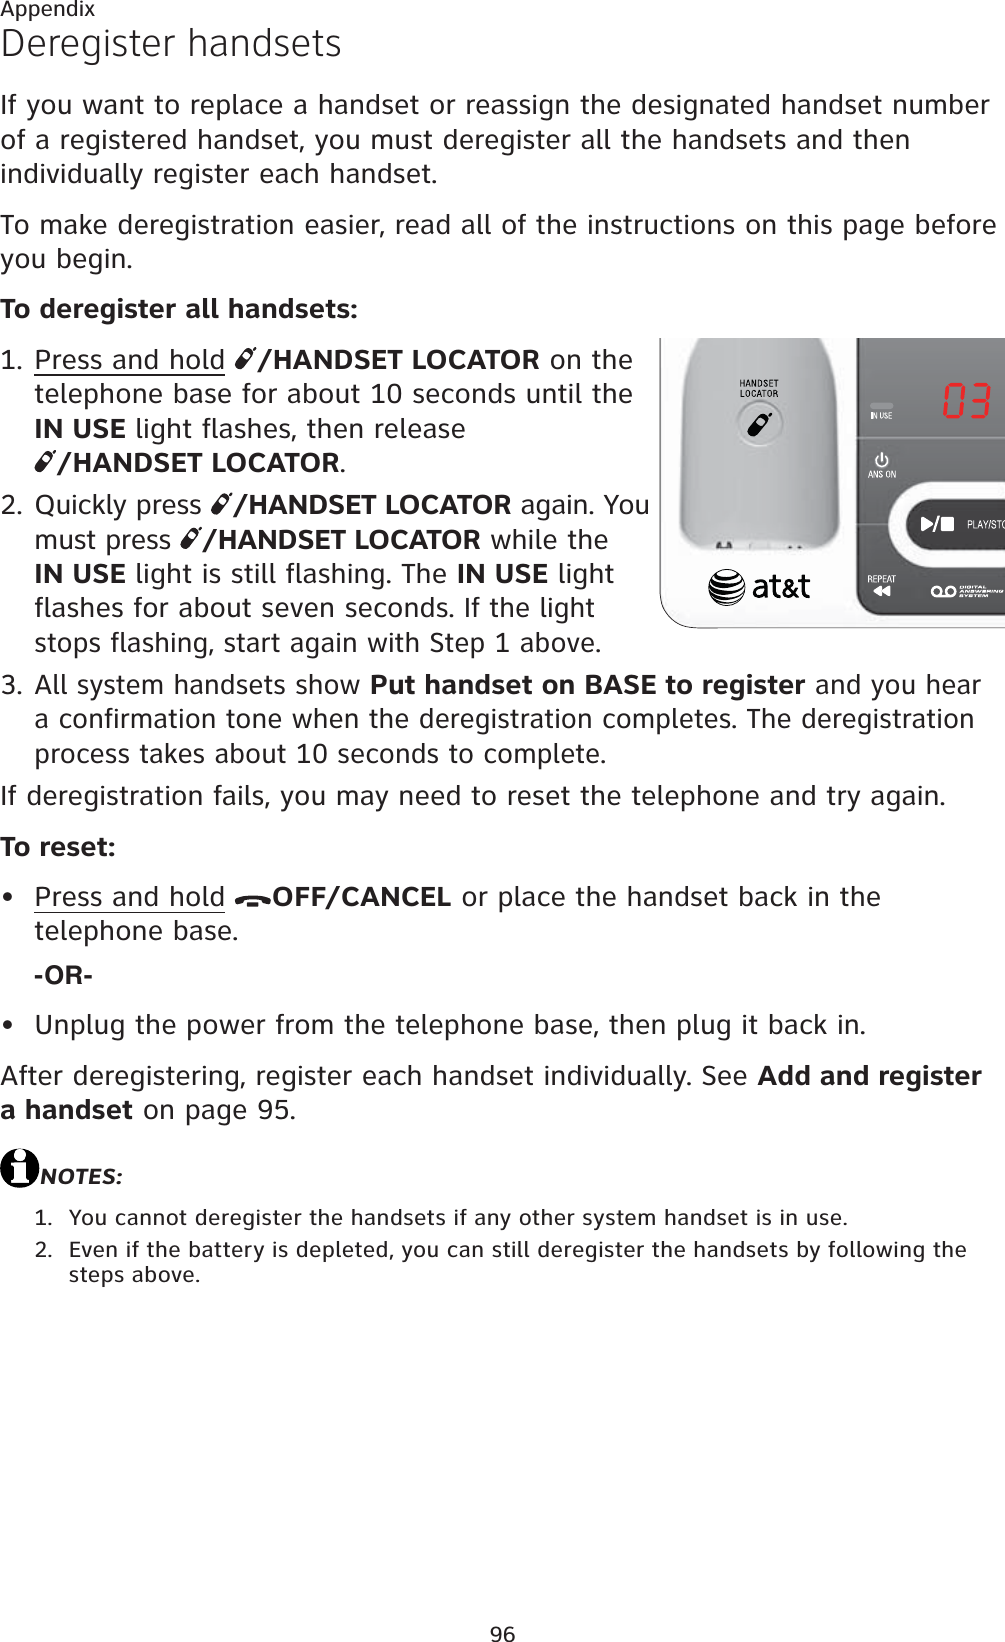 96AppendixDeregister handsetsIf you want to replace a handset or reassign the designated handset number of a registered handset, you must deregister all the handsets and then individually register each handset.To make deregistration easier, read all of the instructions on this page before you begin. To deregister all handsets:Press and hold /HANDSET LOCATOR on the telephone base for about 10 seconds until the IN USE light flashes, then release /HANDSET LOCATOR.Quickly press  /HANDSET LOCATOR again. You must press  /HANDSET LOCATOR while the IN USE light is still flashing. The IN USE light flashes for about seven seconds.If the light stops flashing, start again with Step 1 above.All system handsets show Put handset on BASE to register and you hear a confirmation tone when the deregistration completes. The deregistration process takes about 10 seconds to complete.If deregistration fails, you may need to reset the telephone and try again.To reset:Press and hold OFF/CANCEL or place the handset back in the telephone base. -OR-Unplug the power from the telephone base, then plug it back in.After deregistering, register each handset individually. See Add and register a handset on page 95.NOTES:You cannot deregister the handsets if any other system handset is in use.Even if the battery is depleted, you can still deregister the handsets by following the steps above.1.2.3.••1.2.